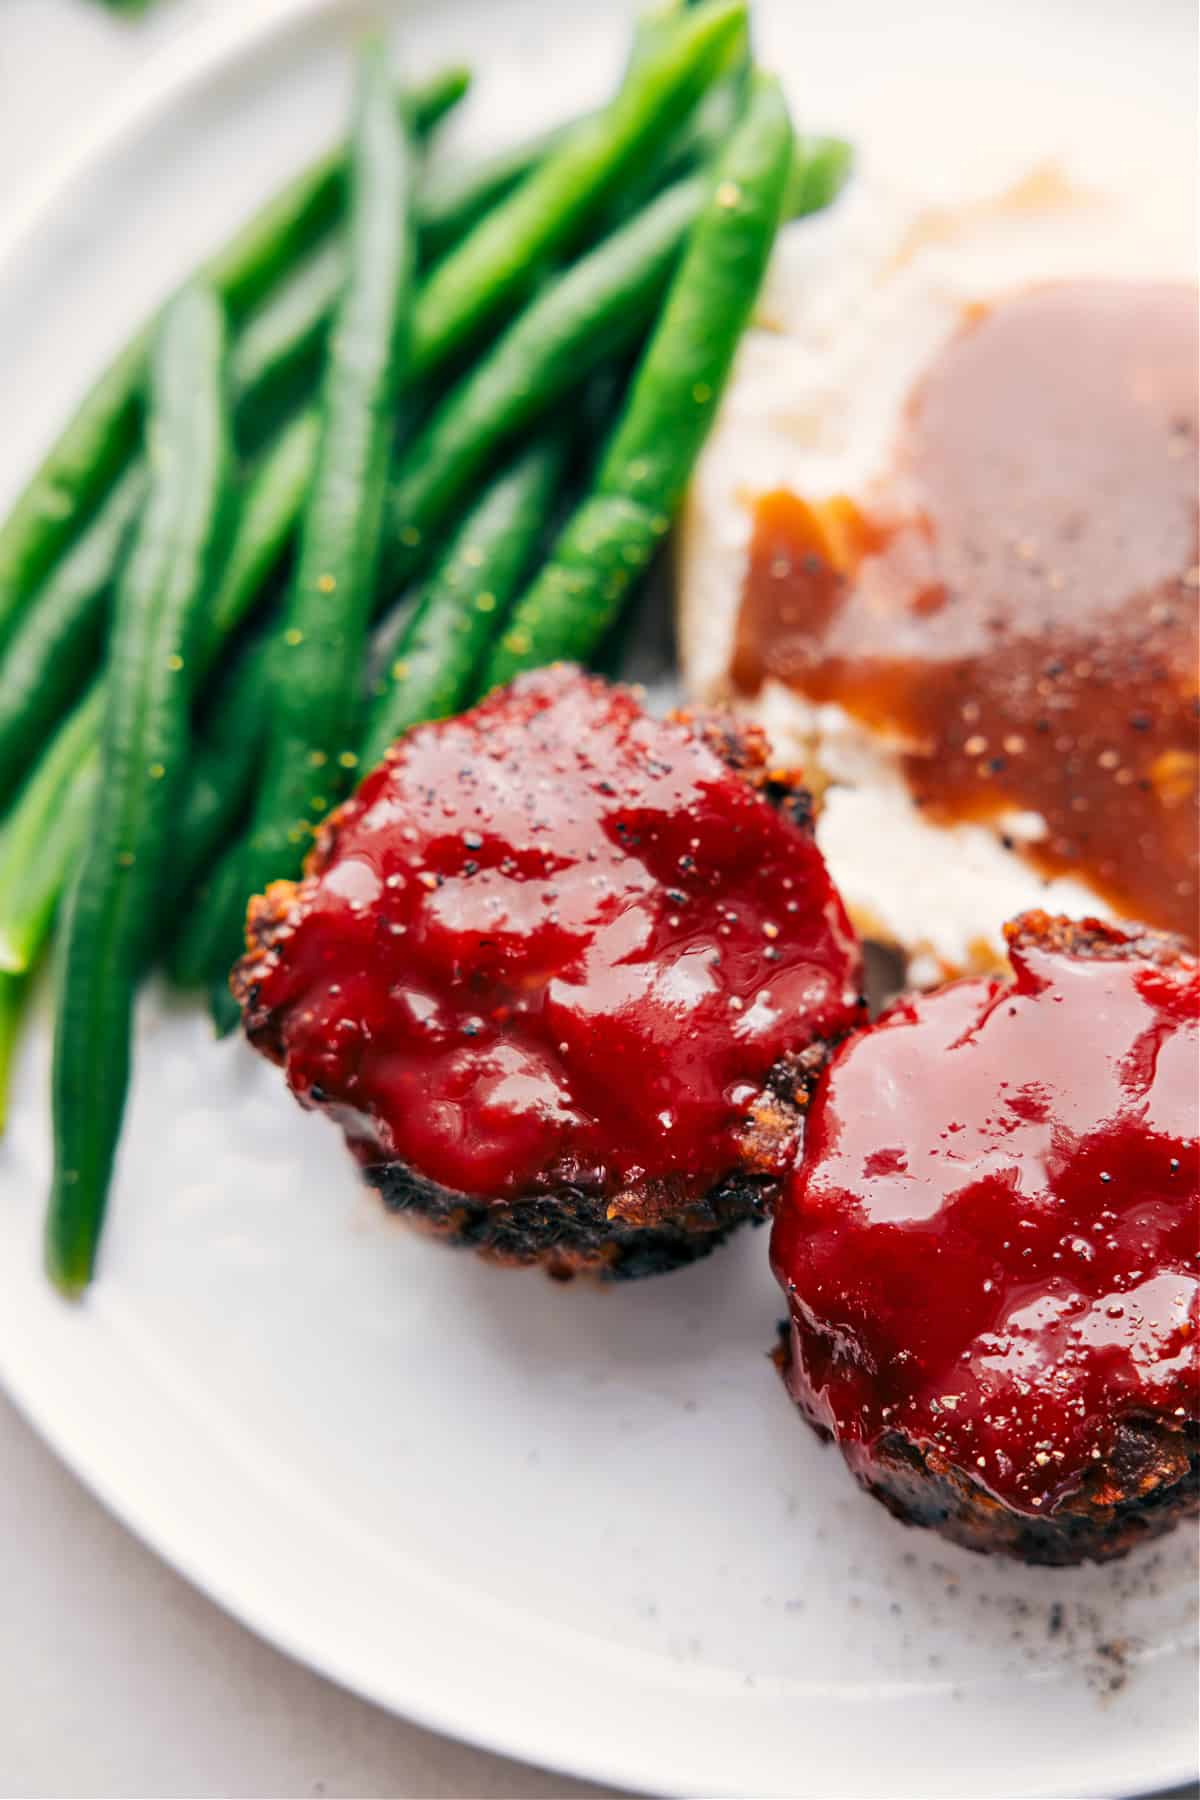 Mini Meatloaf recipe on a plate ready to. be enjoyed.